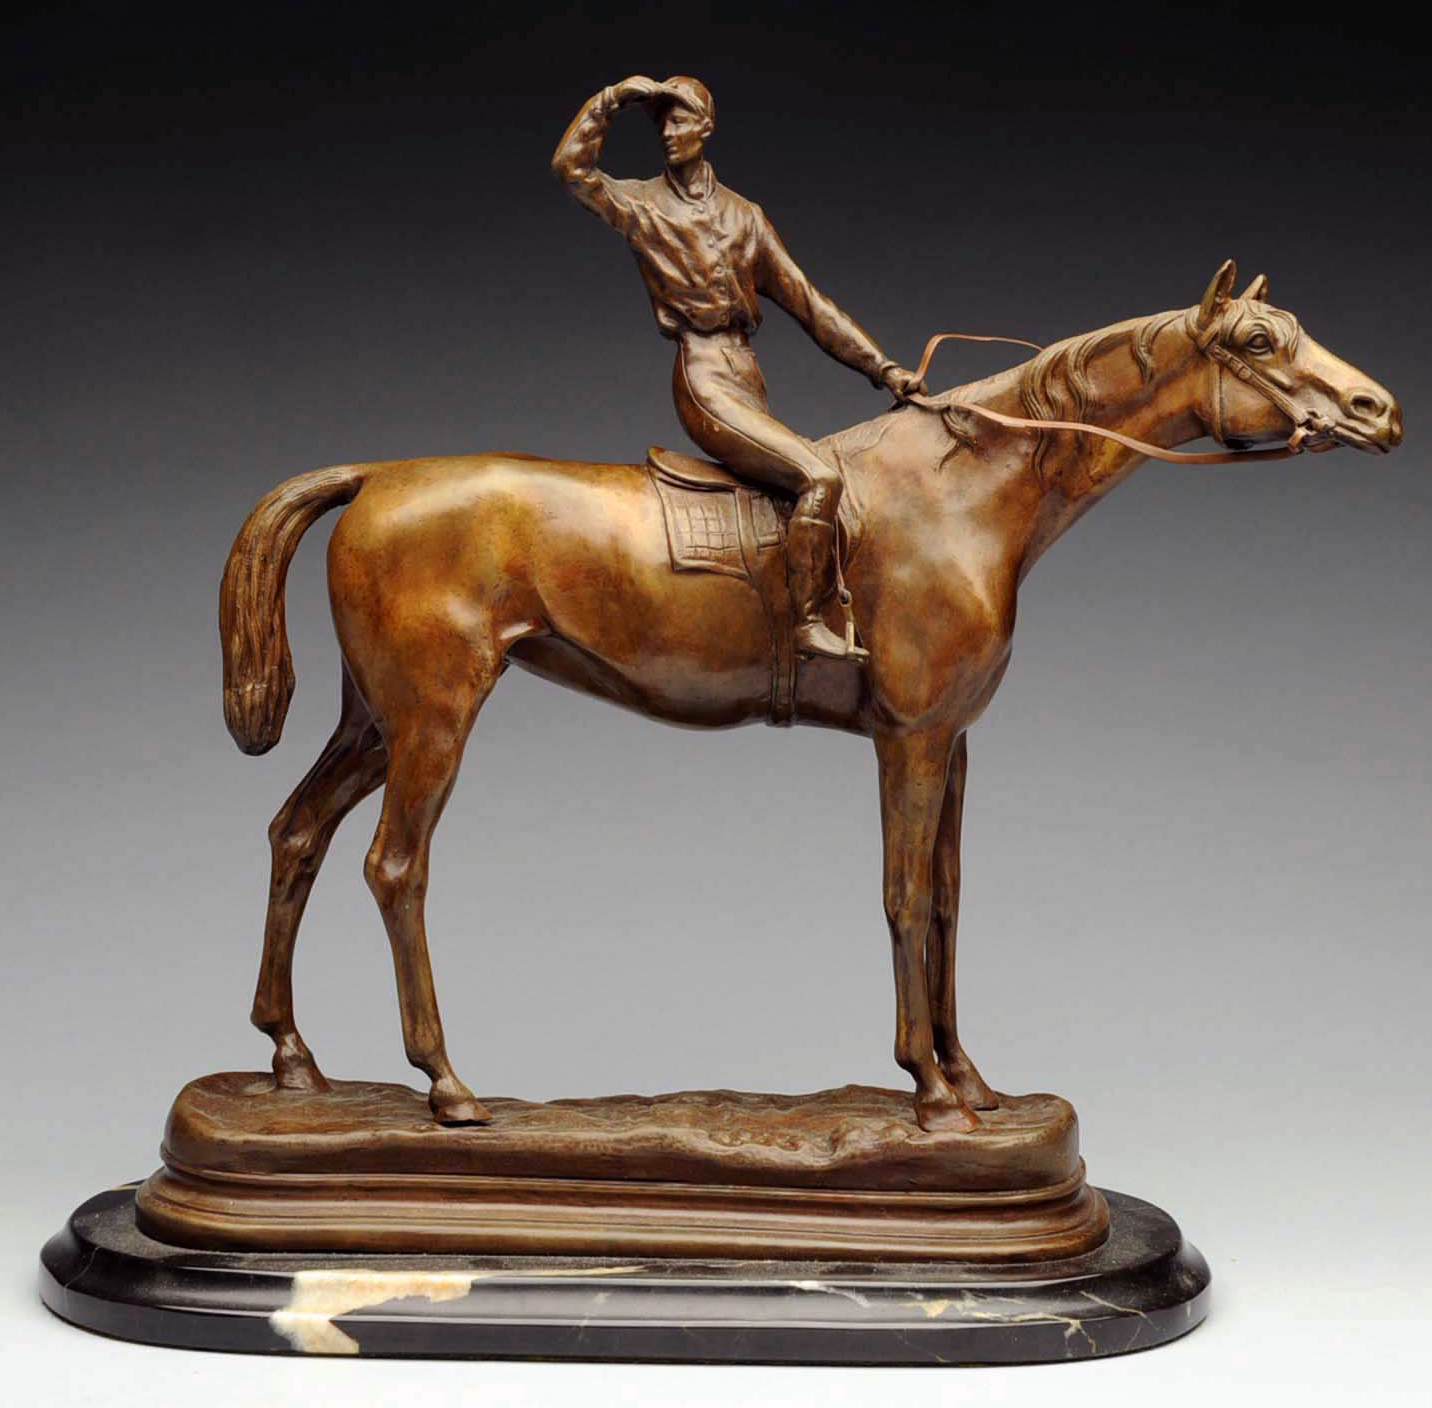 Bronze of jockey riding horse by P.J. Mene, marble base, 14 inches tall, excellent condition. Estimate: $2,000-$3,000. Morphy Auctions image